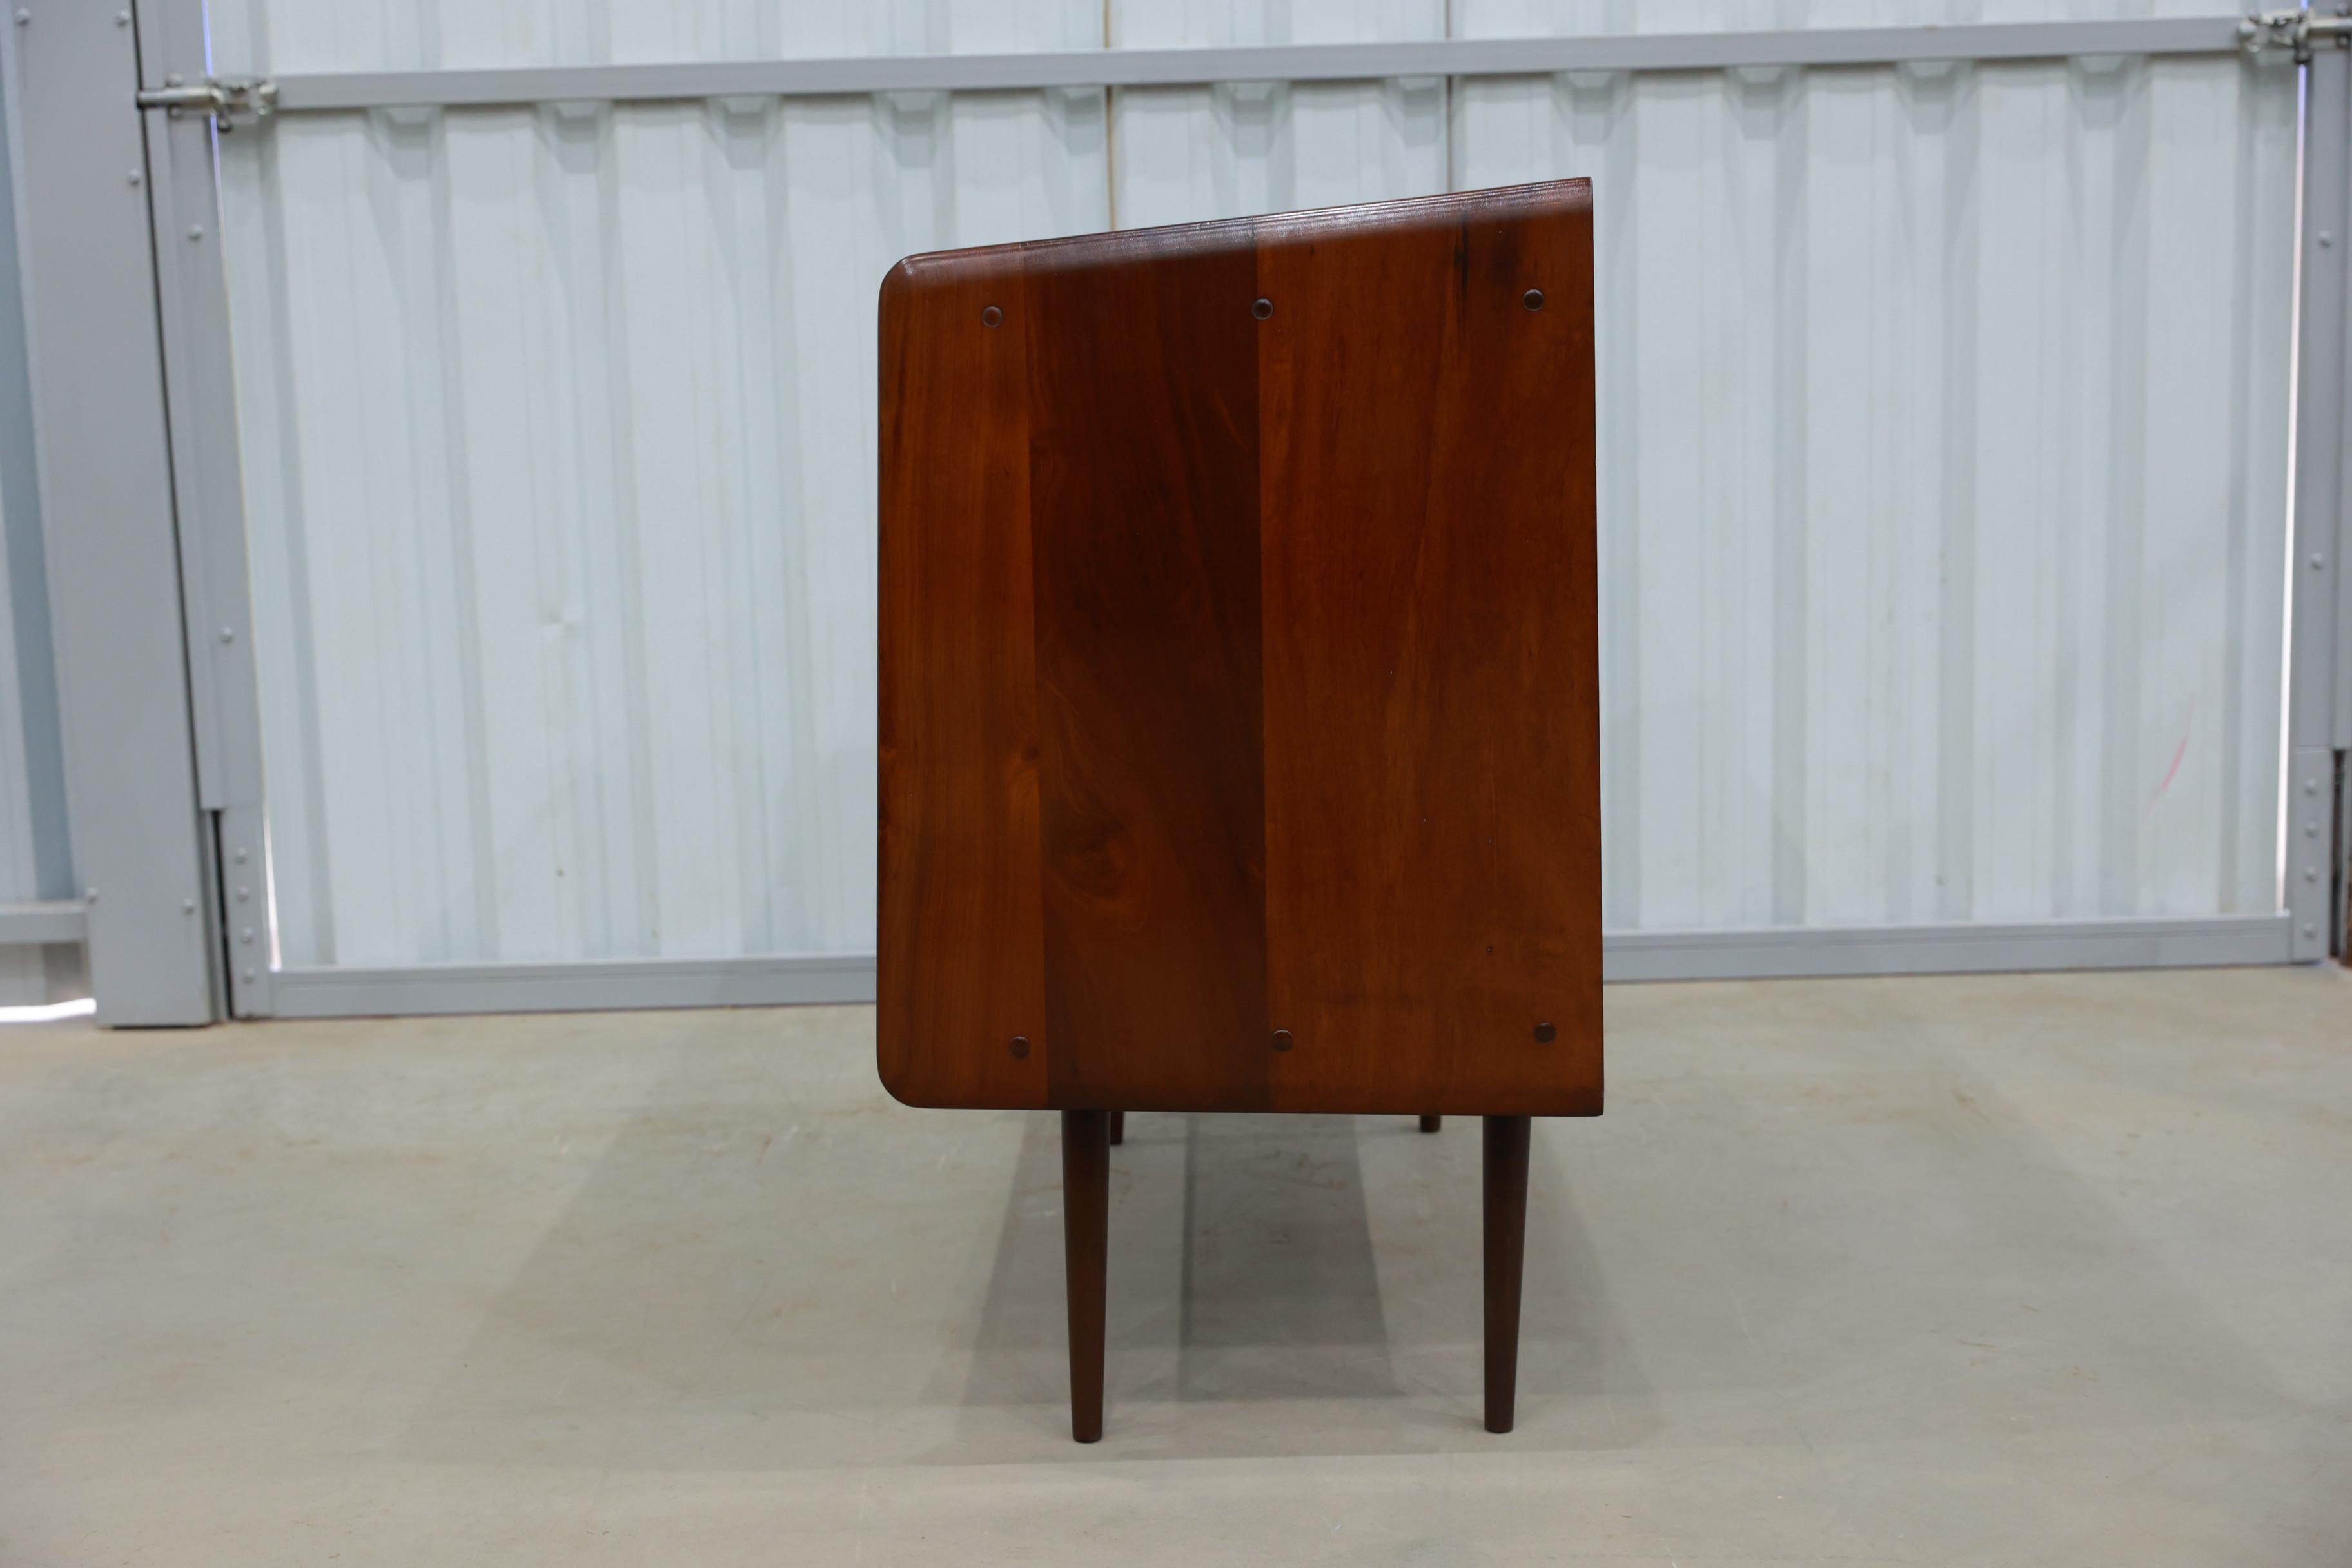 Brazilian Modern Chest of Drawers in Hardwood by Moveis Cimo, 1950s, Brazil For Sale 2